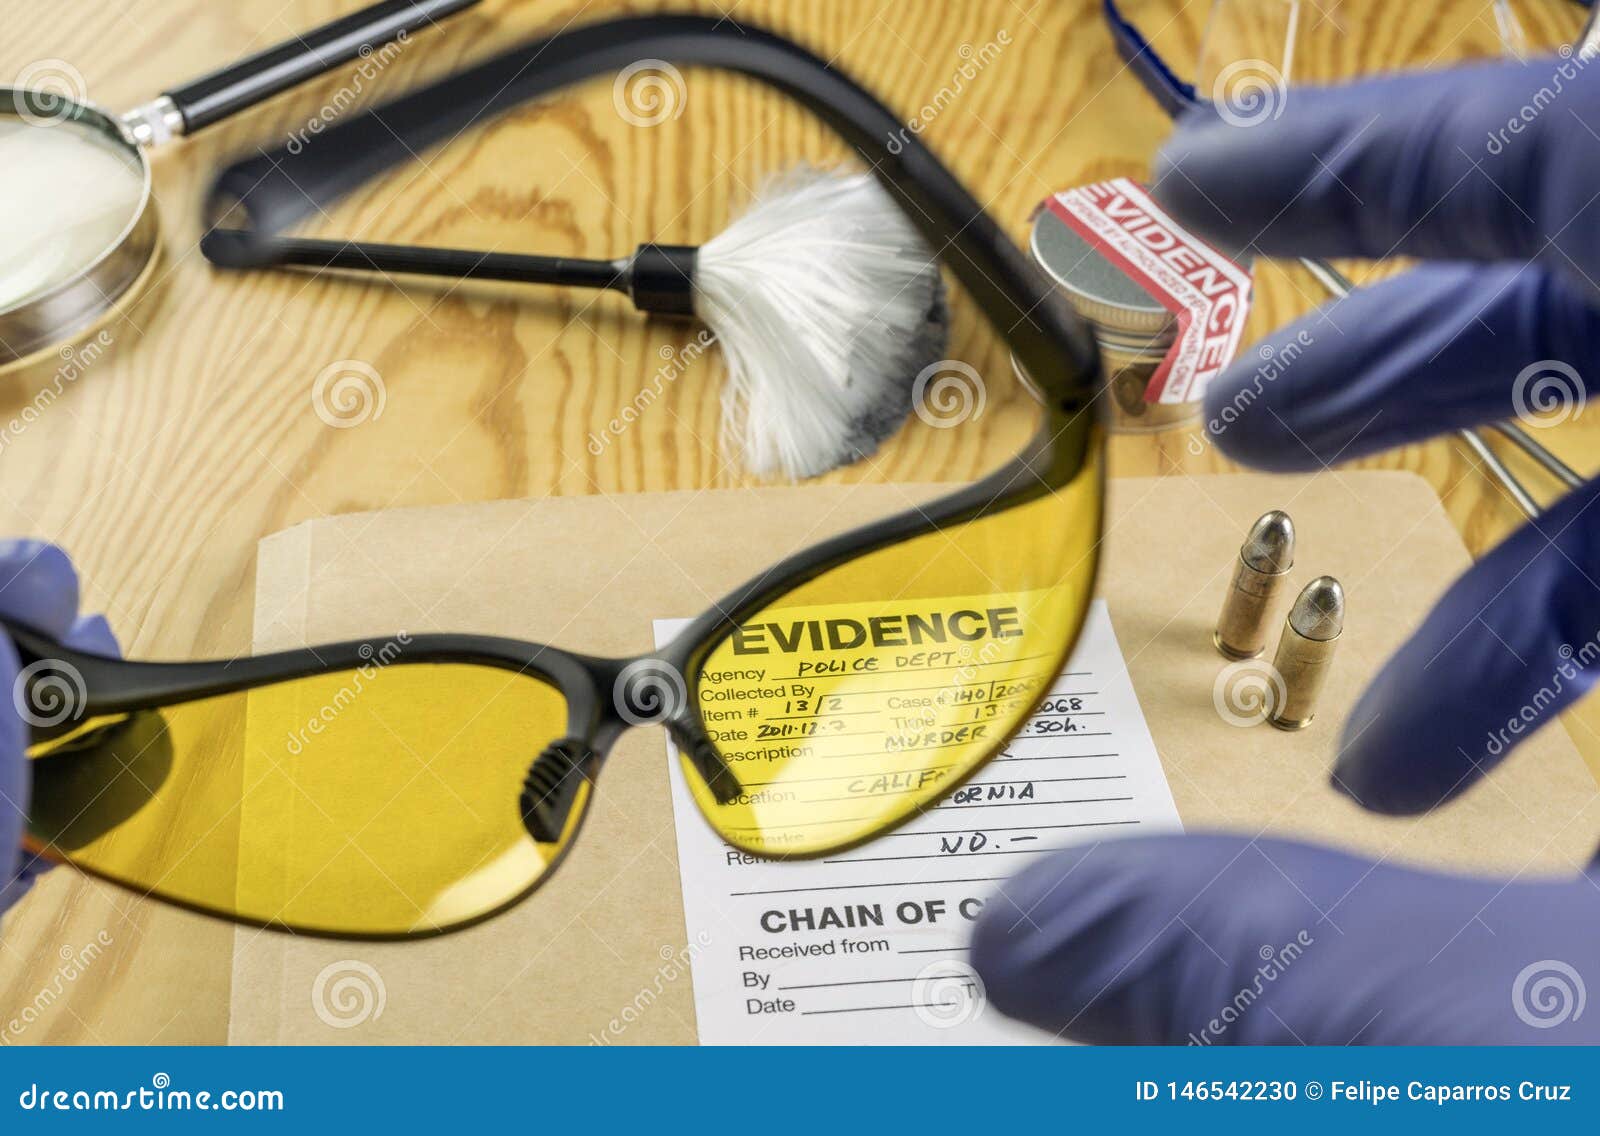 basic research utensils with a evidence bag in laboratorio forensic equipment